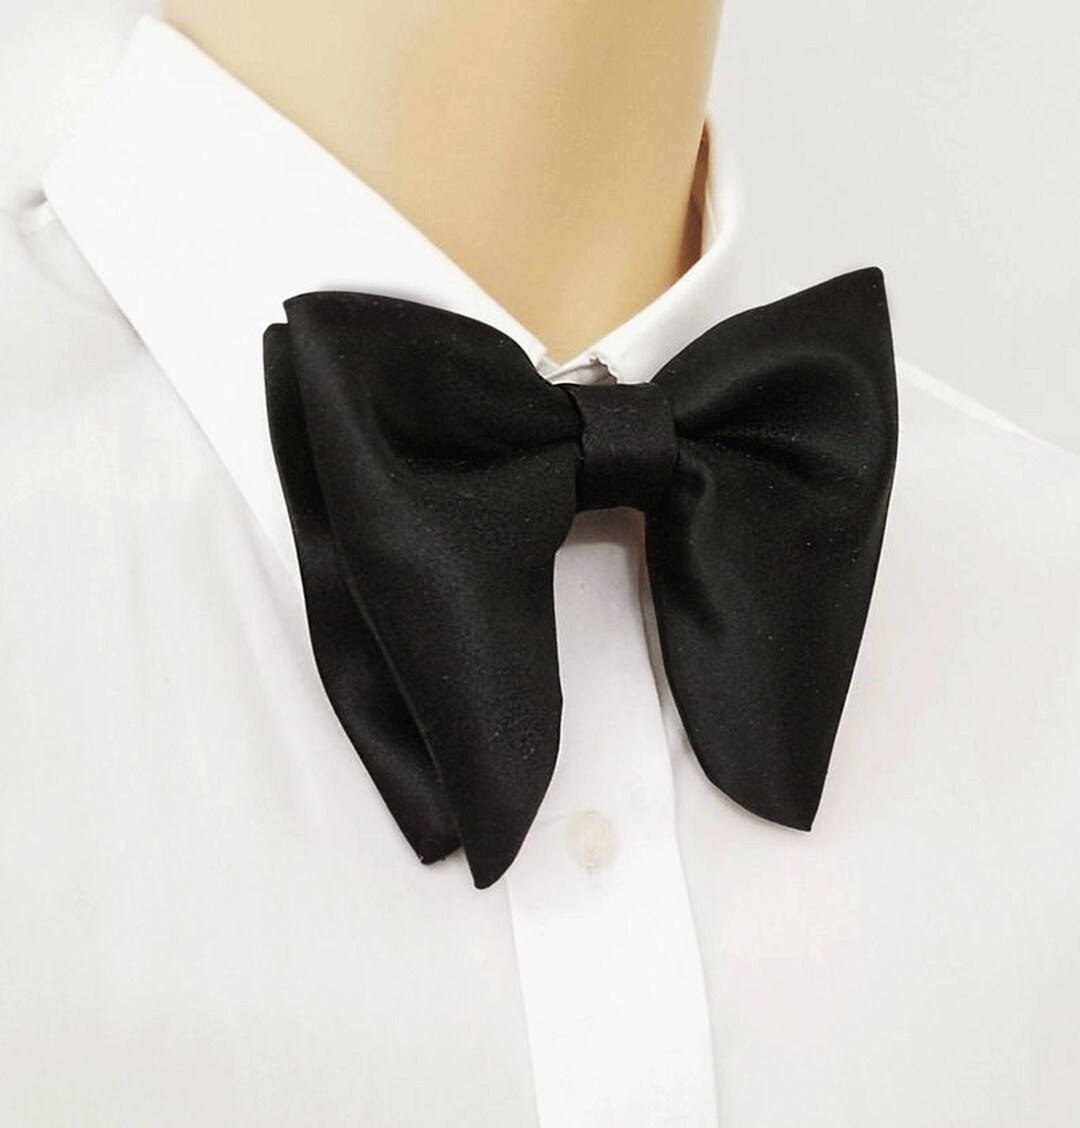 Butterfly Satin Bow Tie,black,blush Large Satin Bow Tie,pocket Square ...